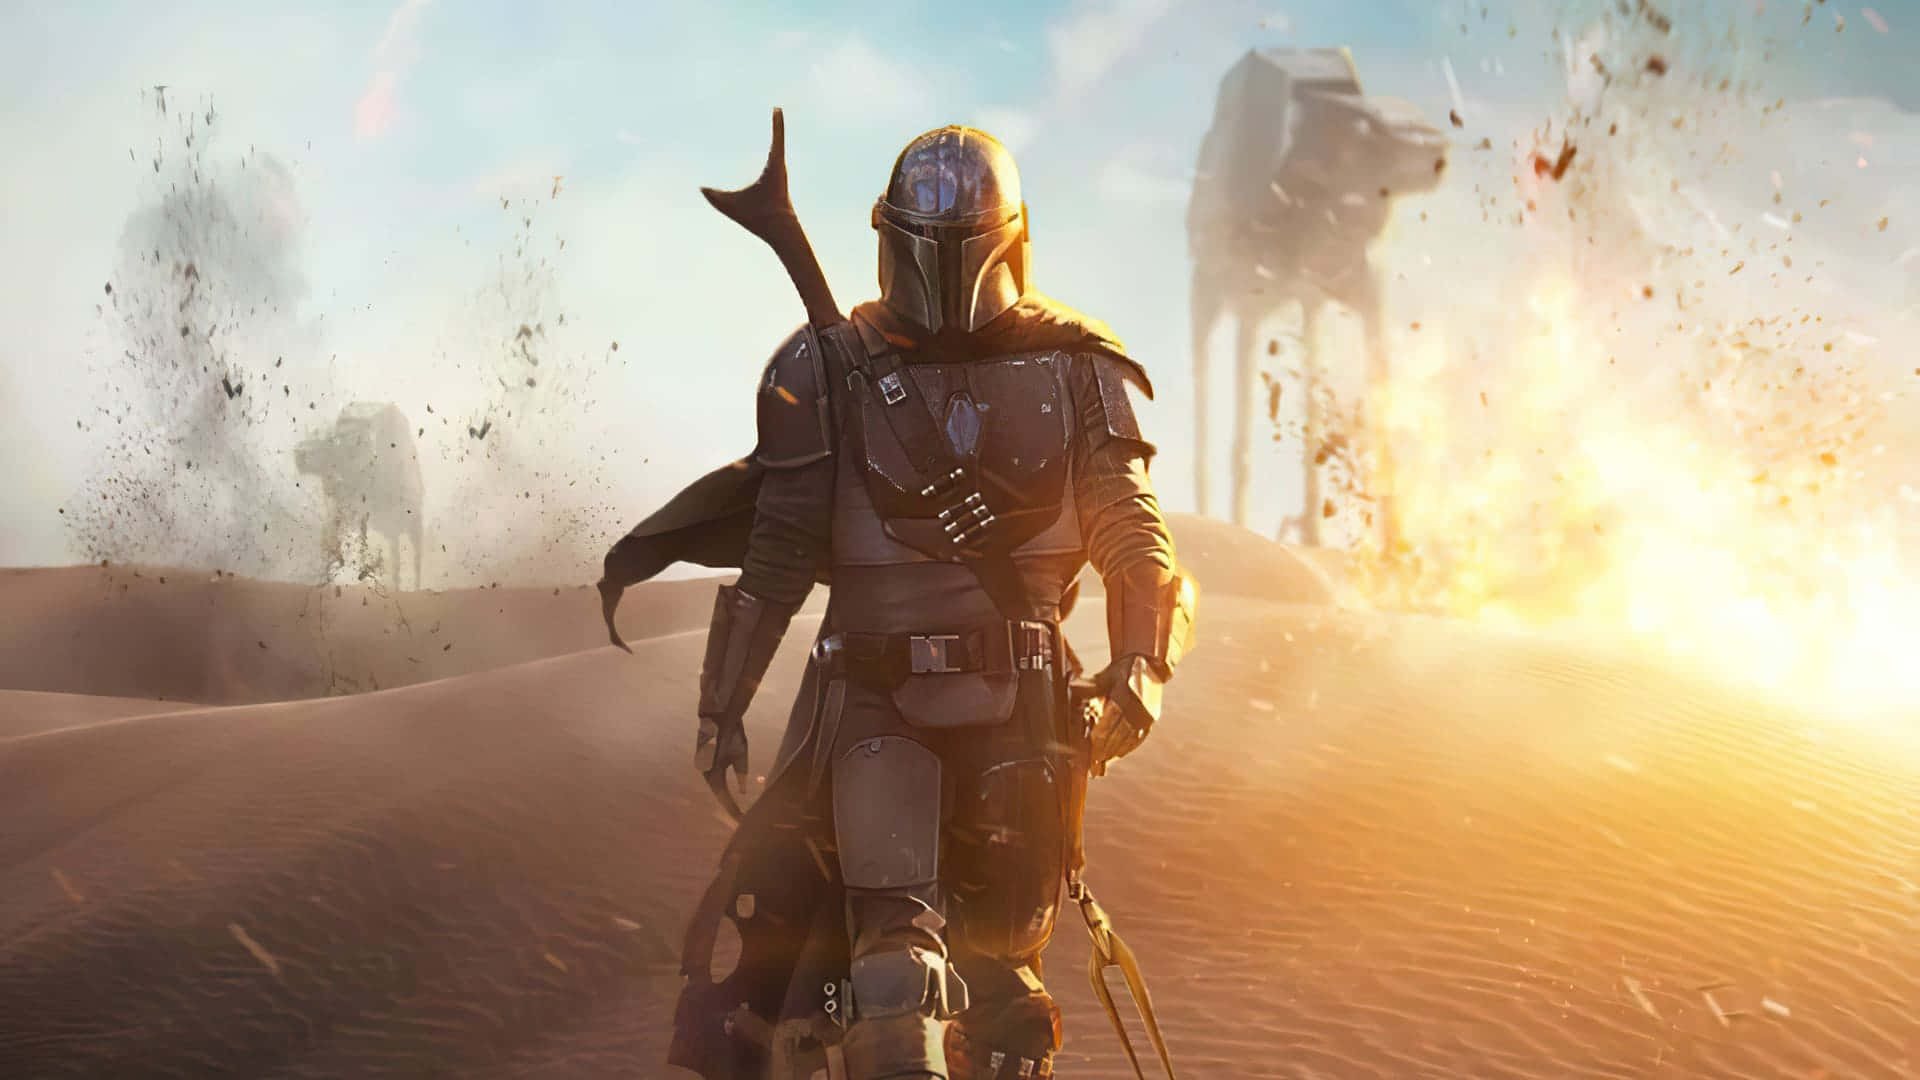 The Mandalorian makes a heroic journey across the galaxy